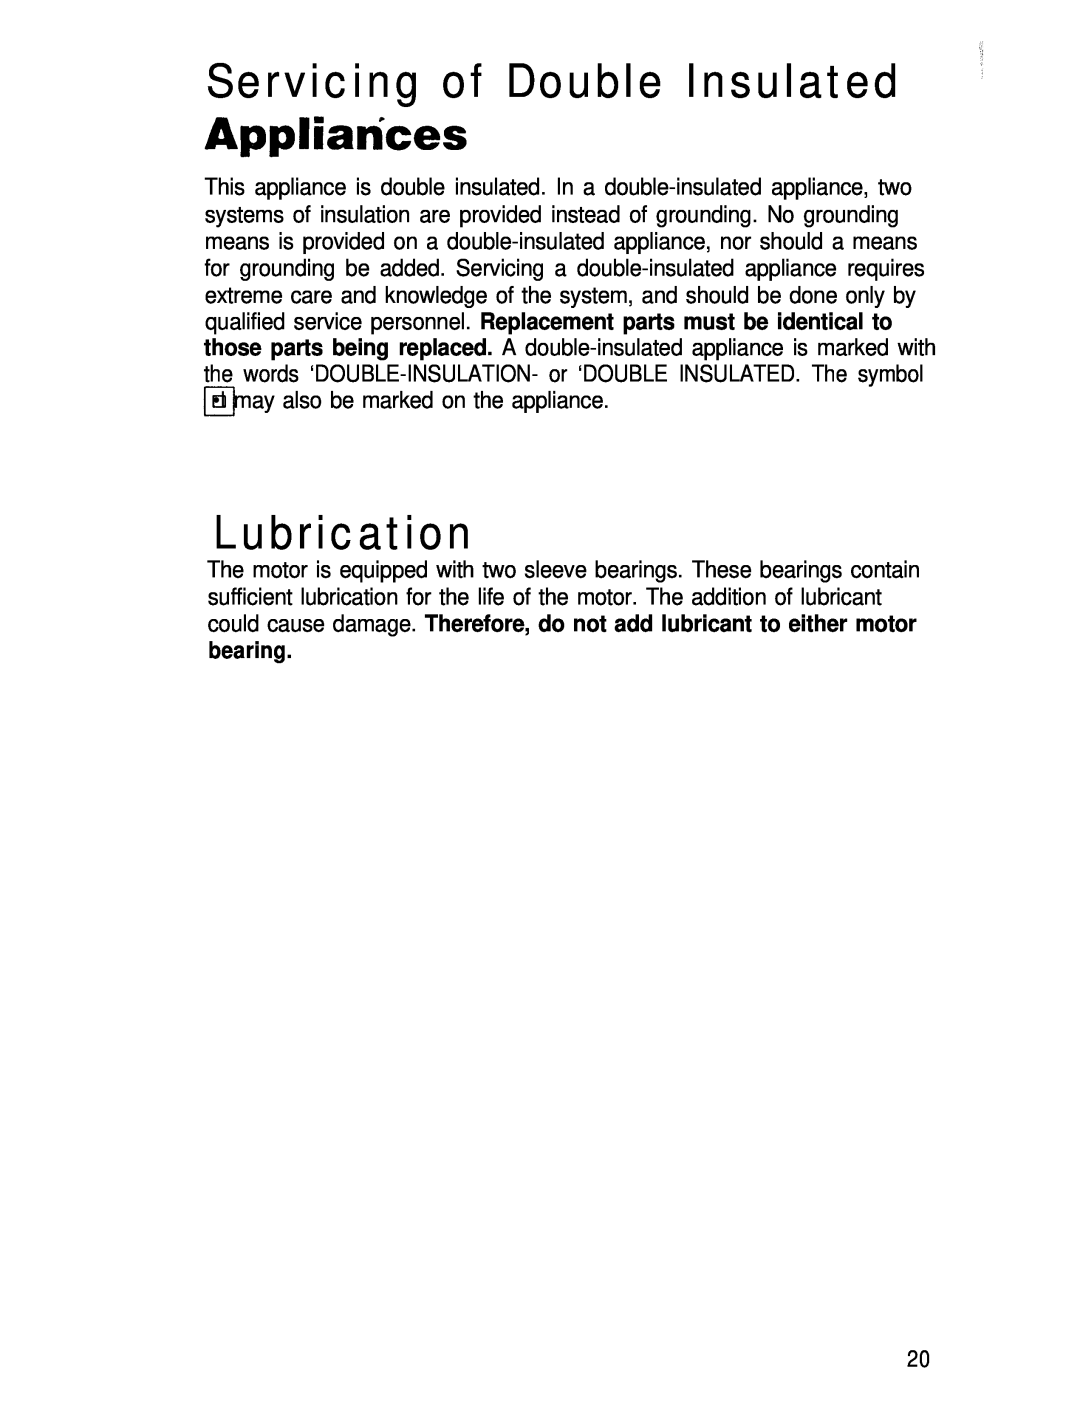 Hoover Shampoo- Polisher manual Servicing of Double Insulated Appliatices, Lubrication 